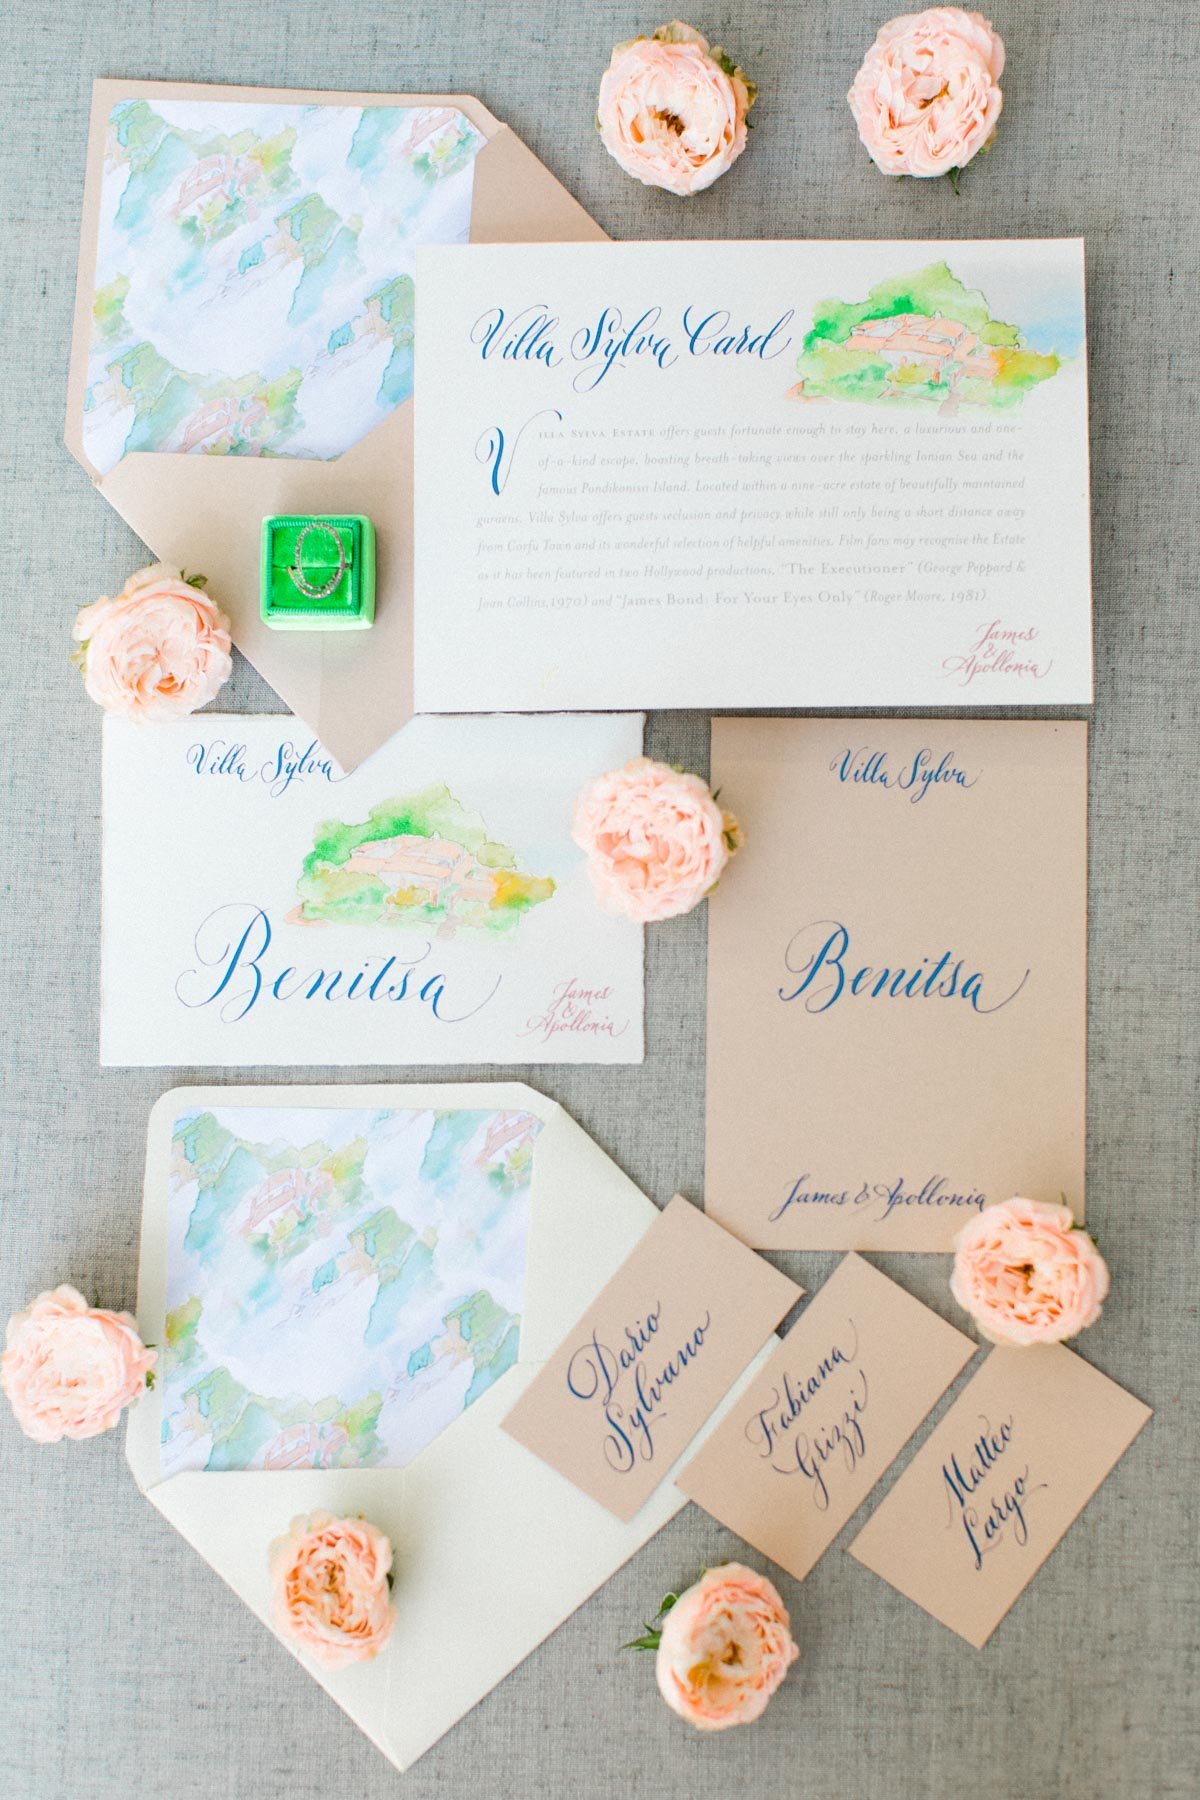 wedding invitation suite with whimsical watercolor accents